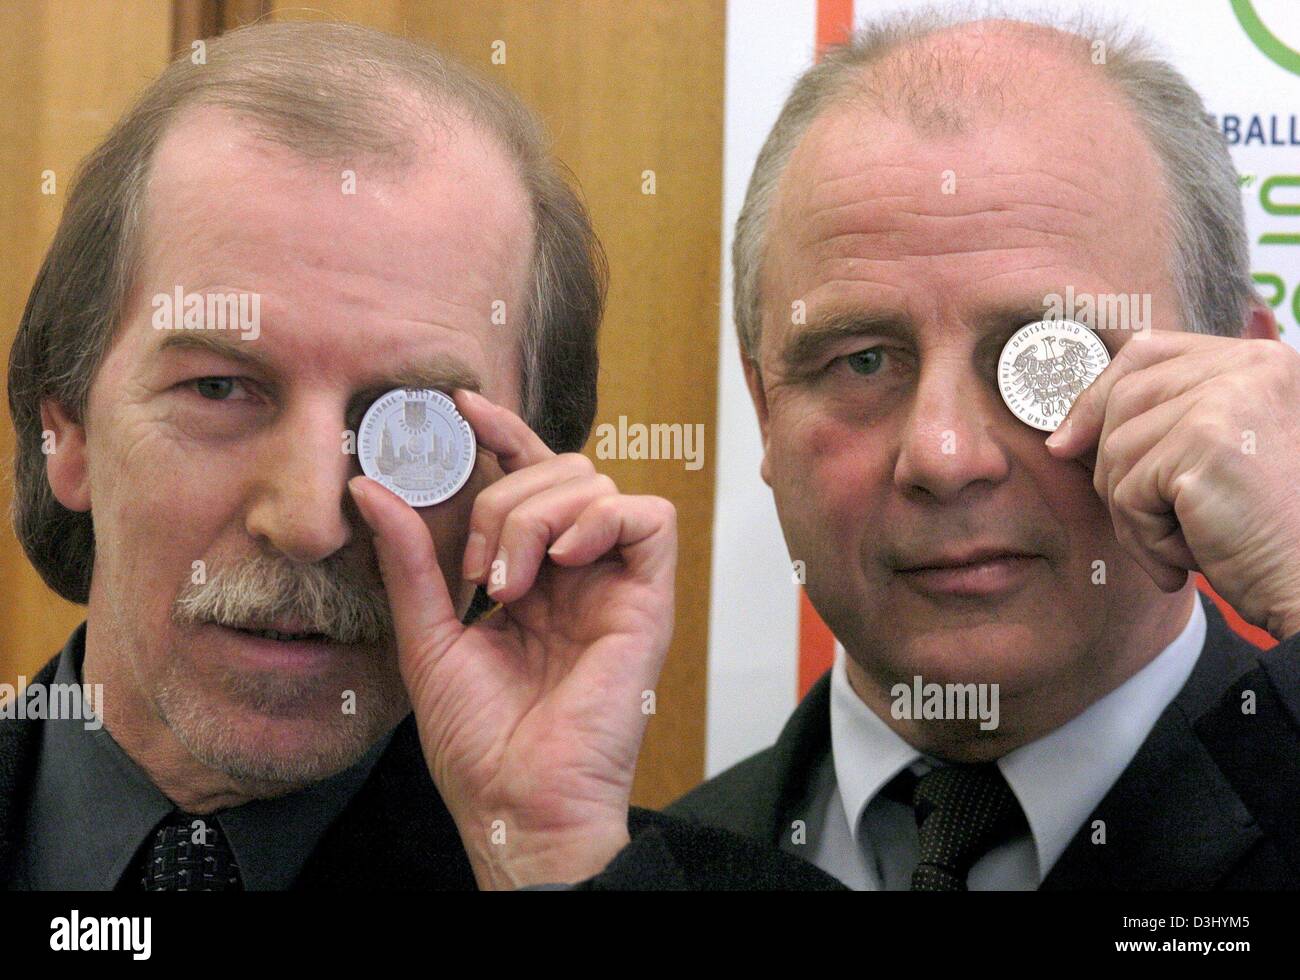 (dpa) - German soccer legends and current World Cup ambassadors Juergen Grabowski (L) and Bernd Hoelzenbein present the first issued commemorative coins for the 2006 World Cup in Frankfurt Main, Germany, 28 January 2004. The coins feature some of Frankfurt's landmarks such as the skyline, the Roemer (town hall) and the fair centre along with symboles of the World Cup. Stock Photo